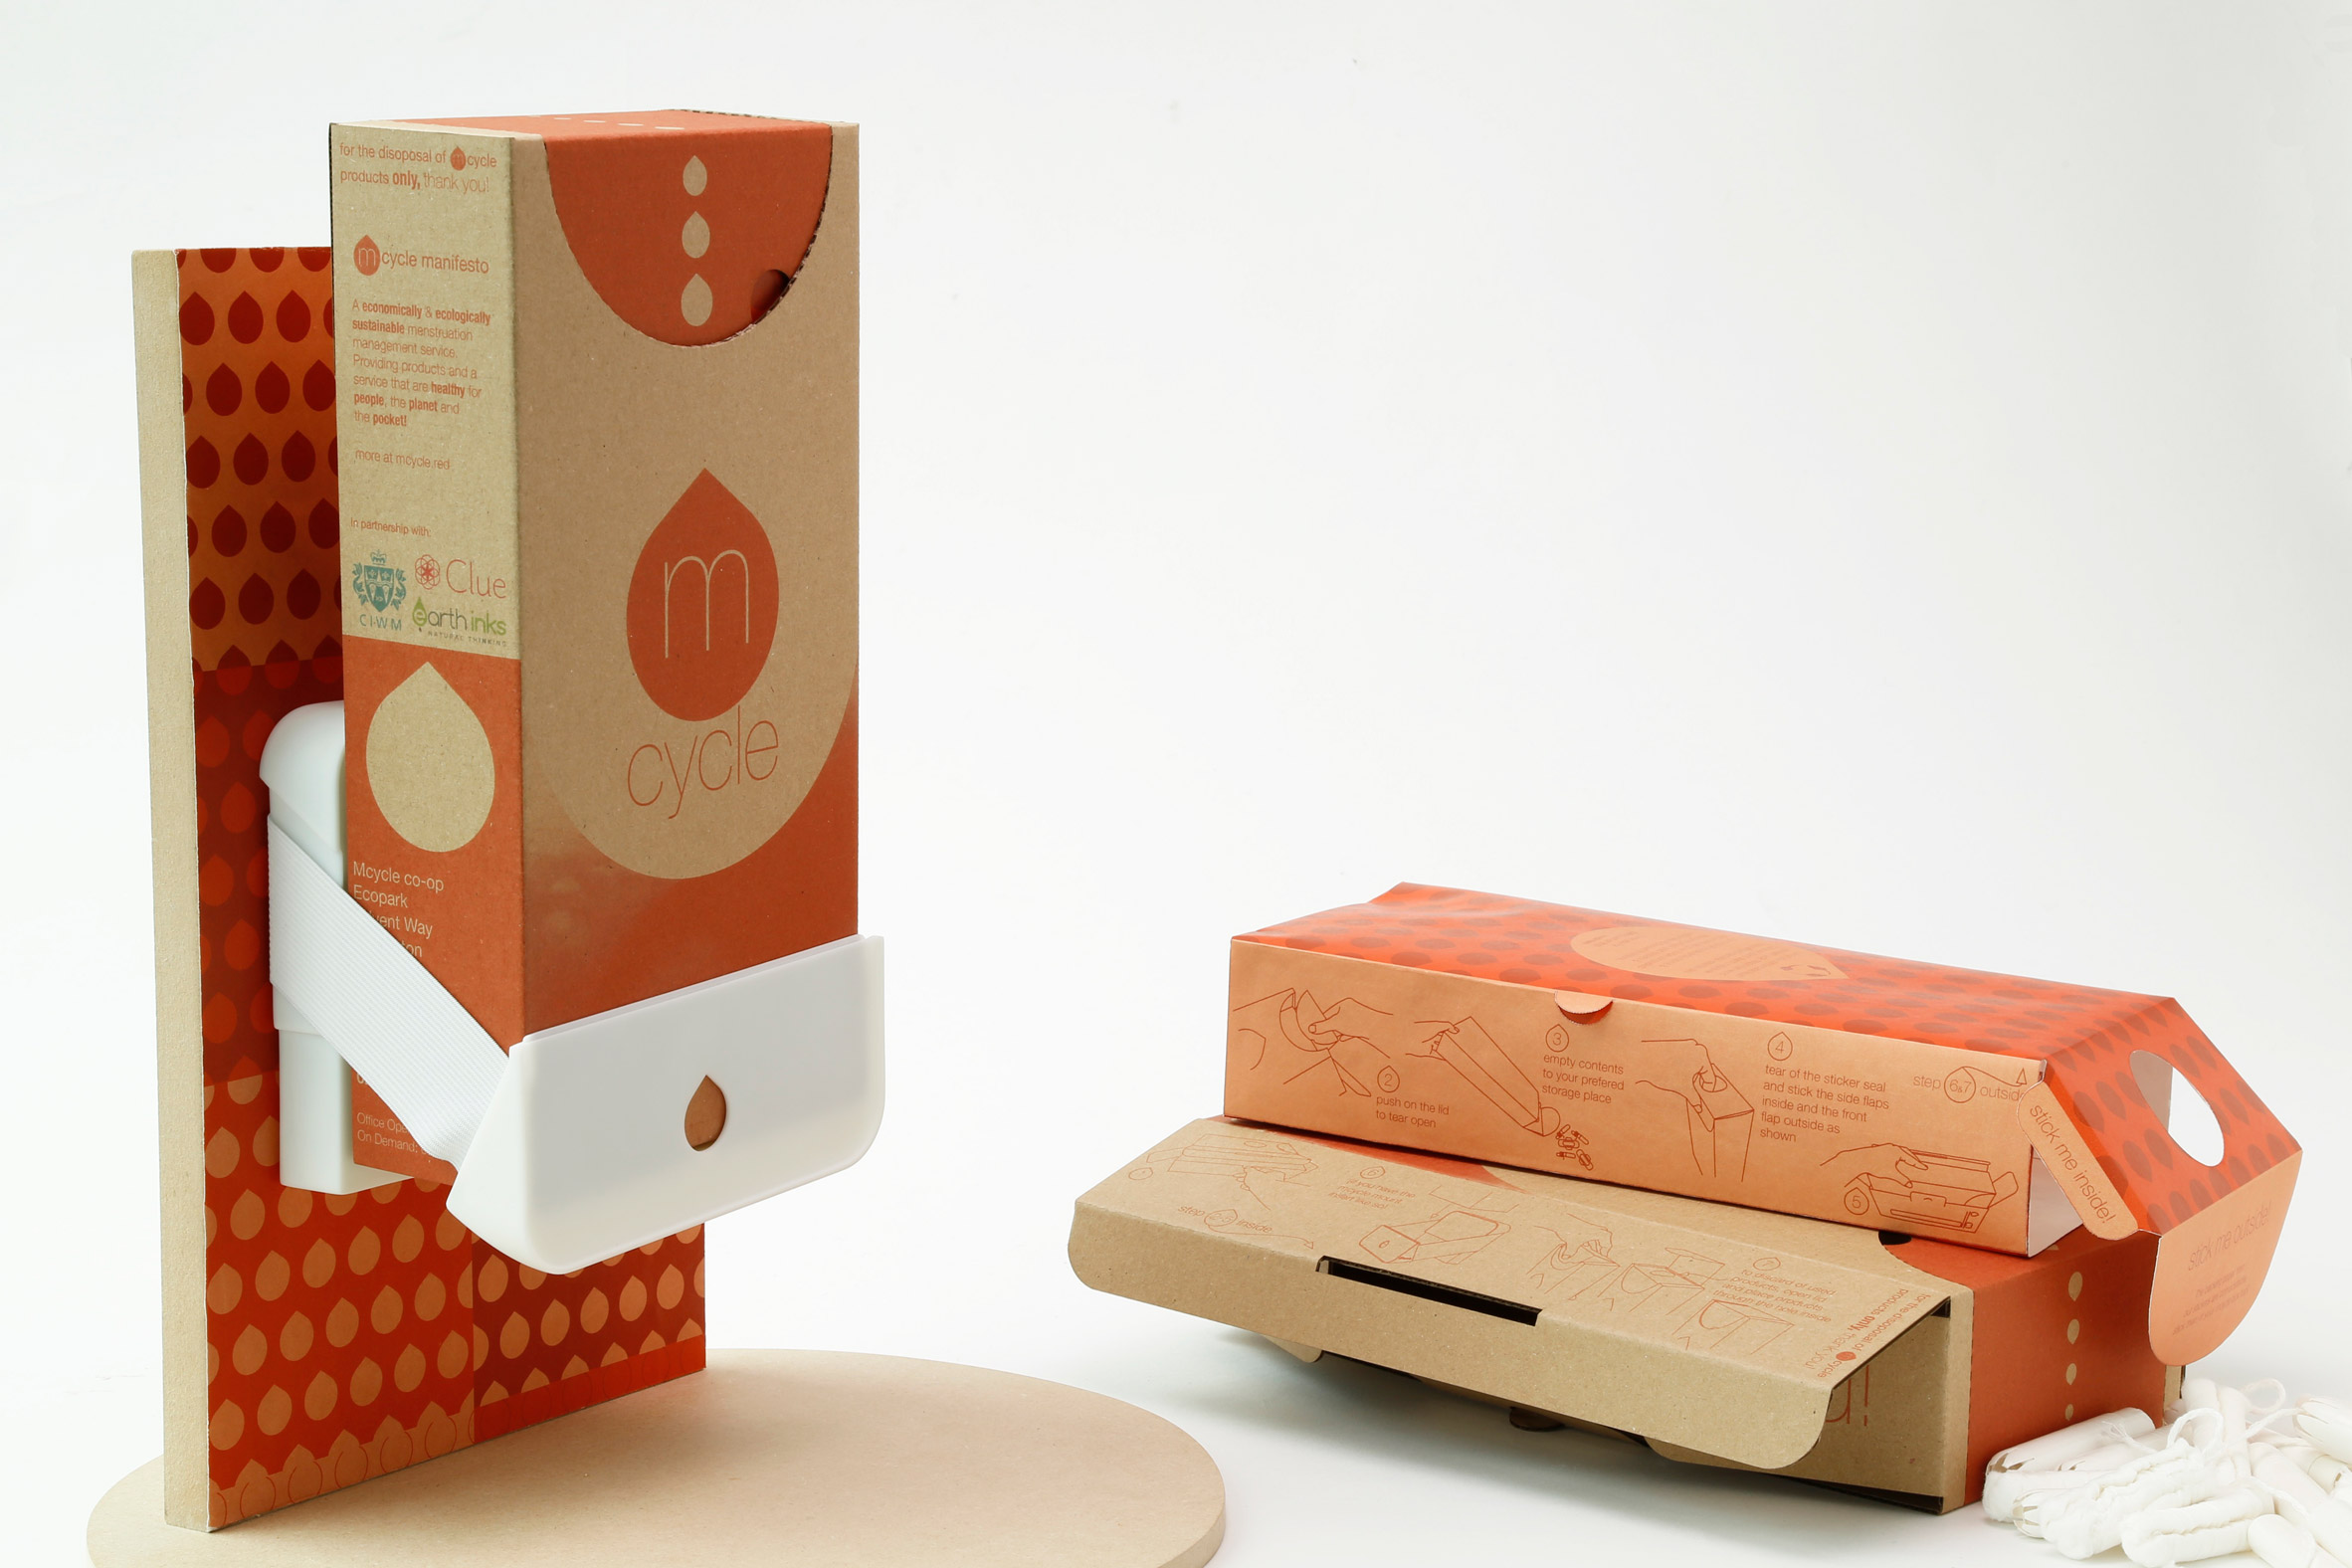 Sliding packaging design shows where to put your Thinx tampon